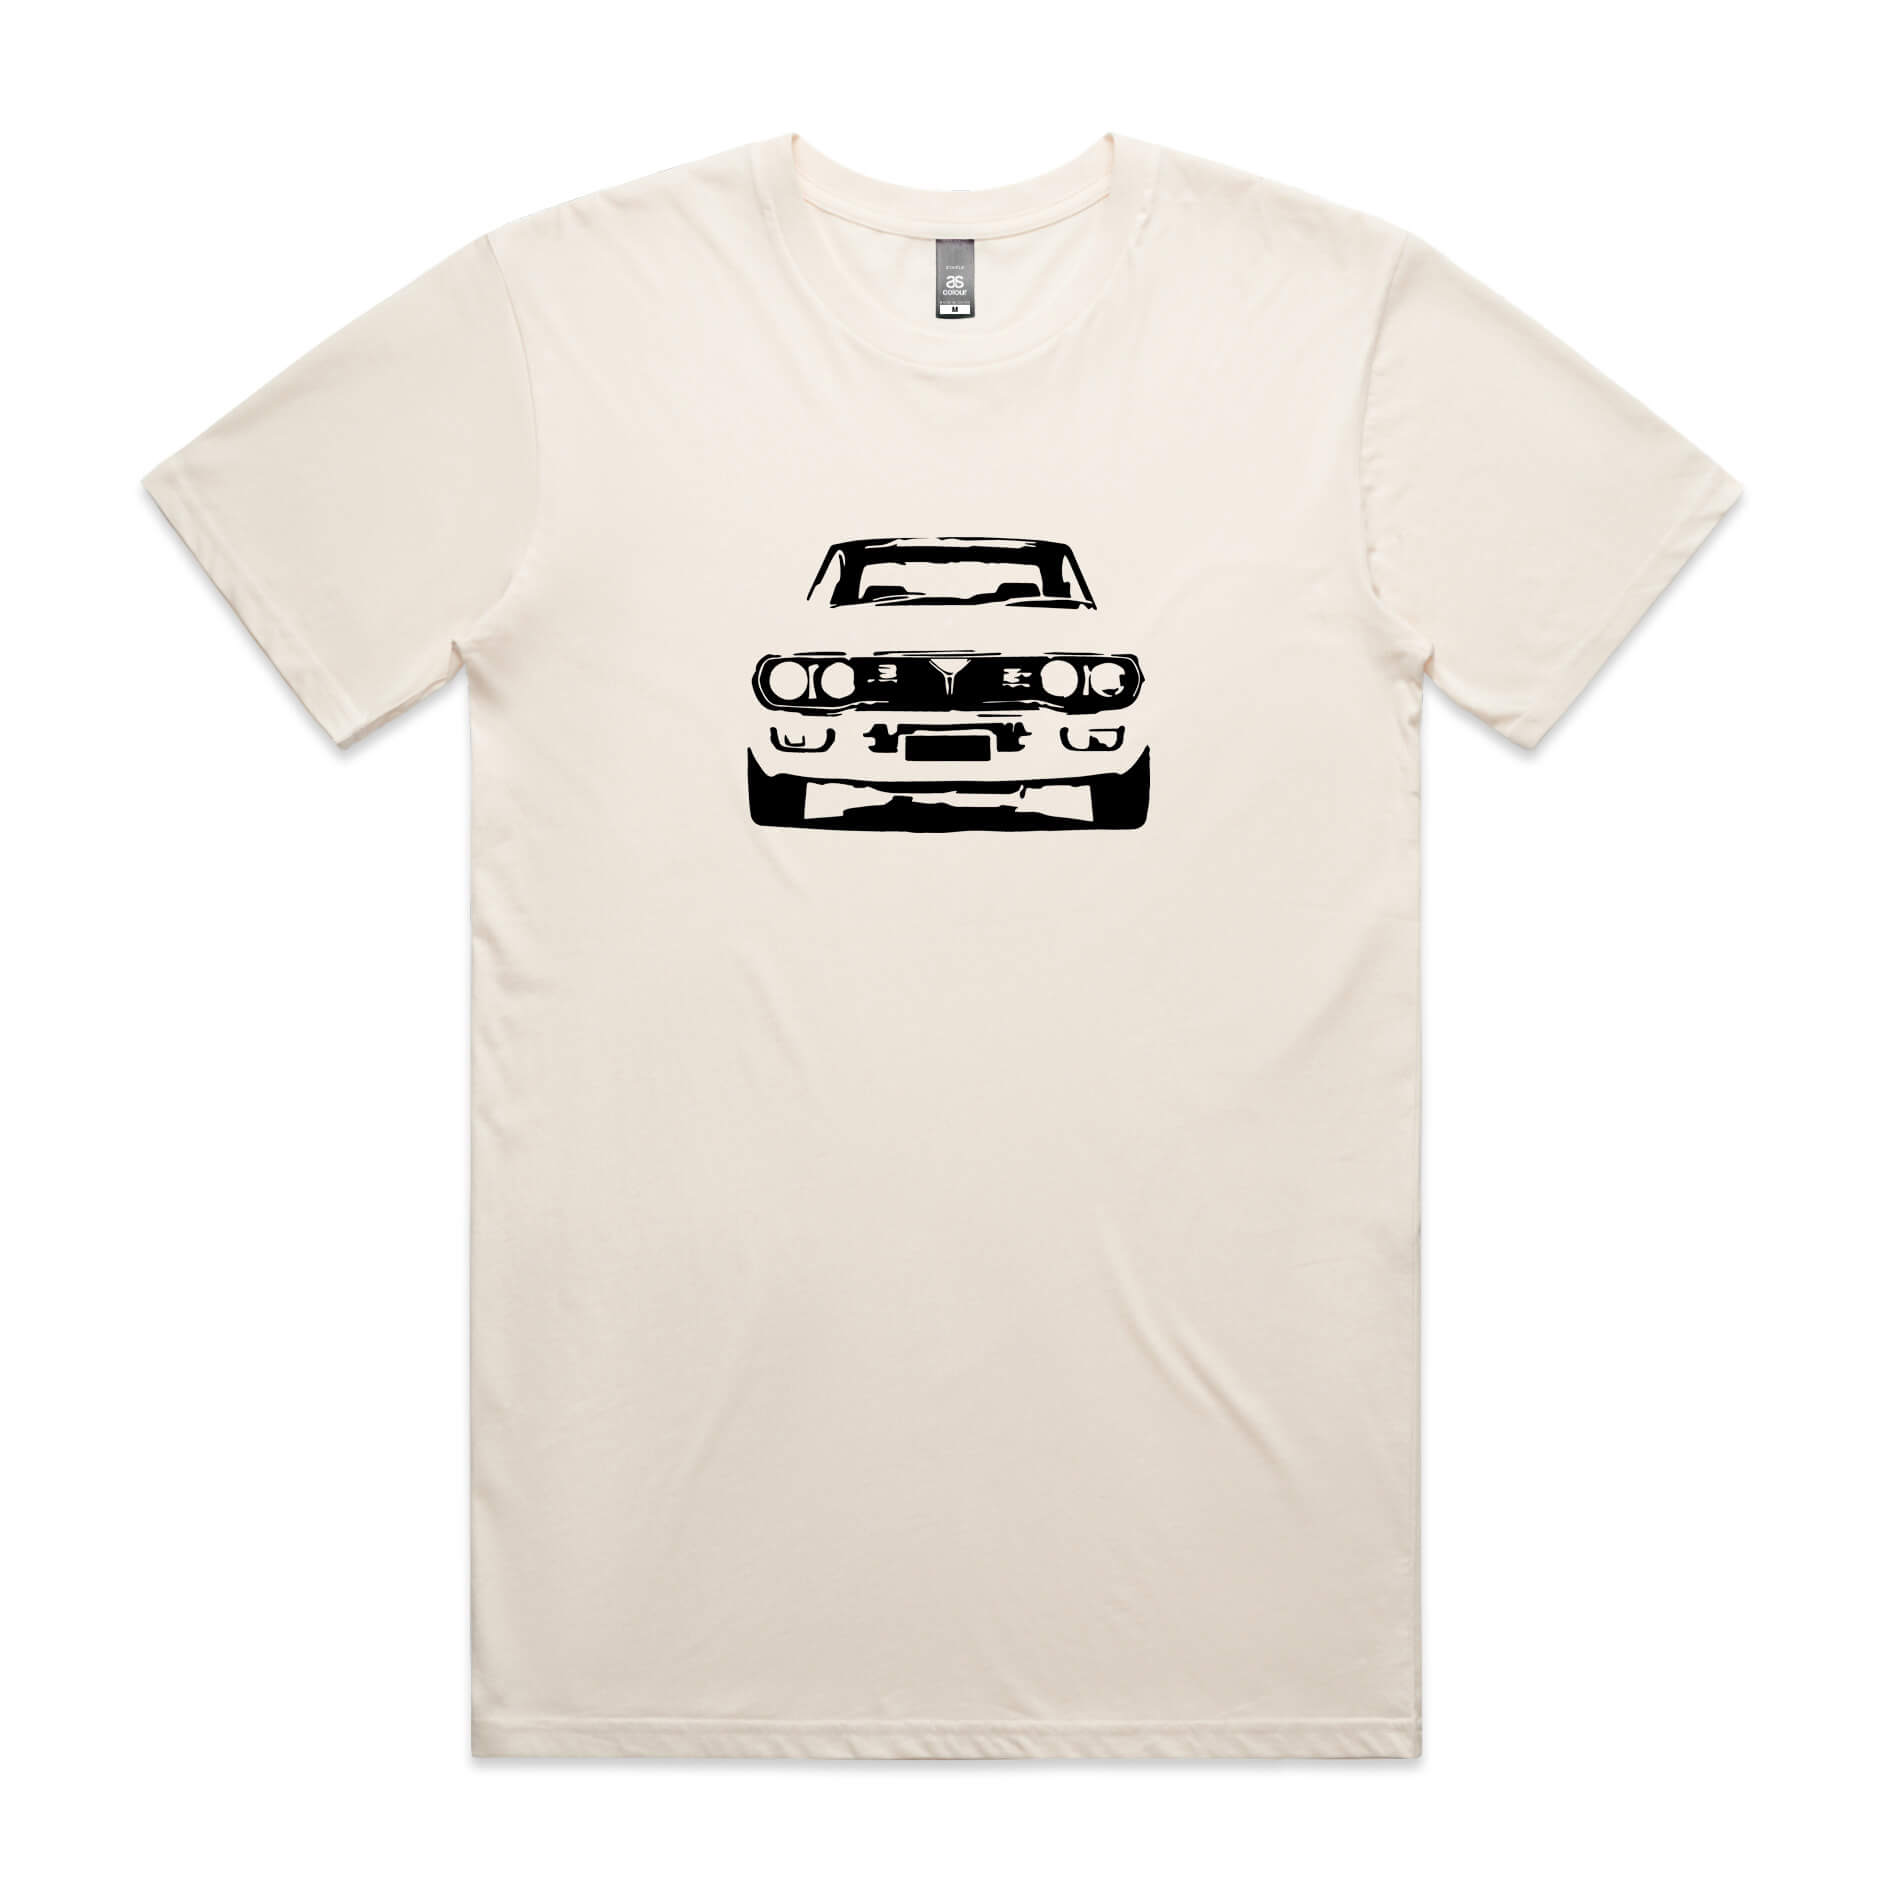 Mazda RX4 t-shirt in beige with black rotary engine car graphic